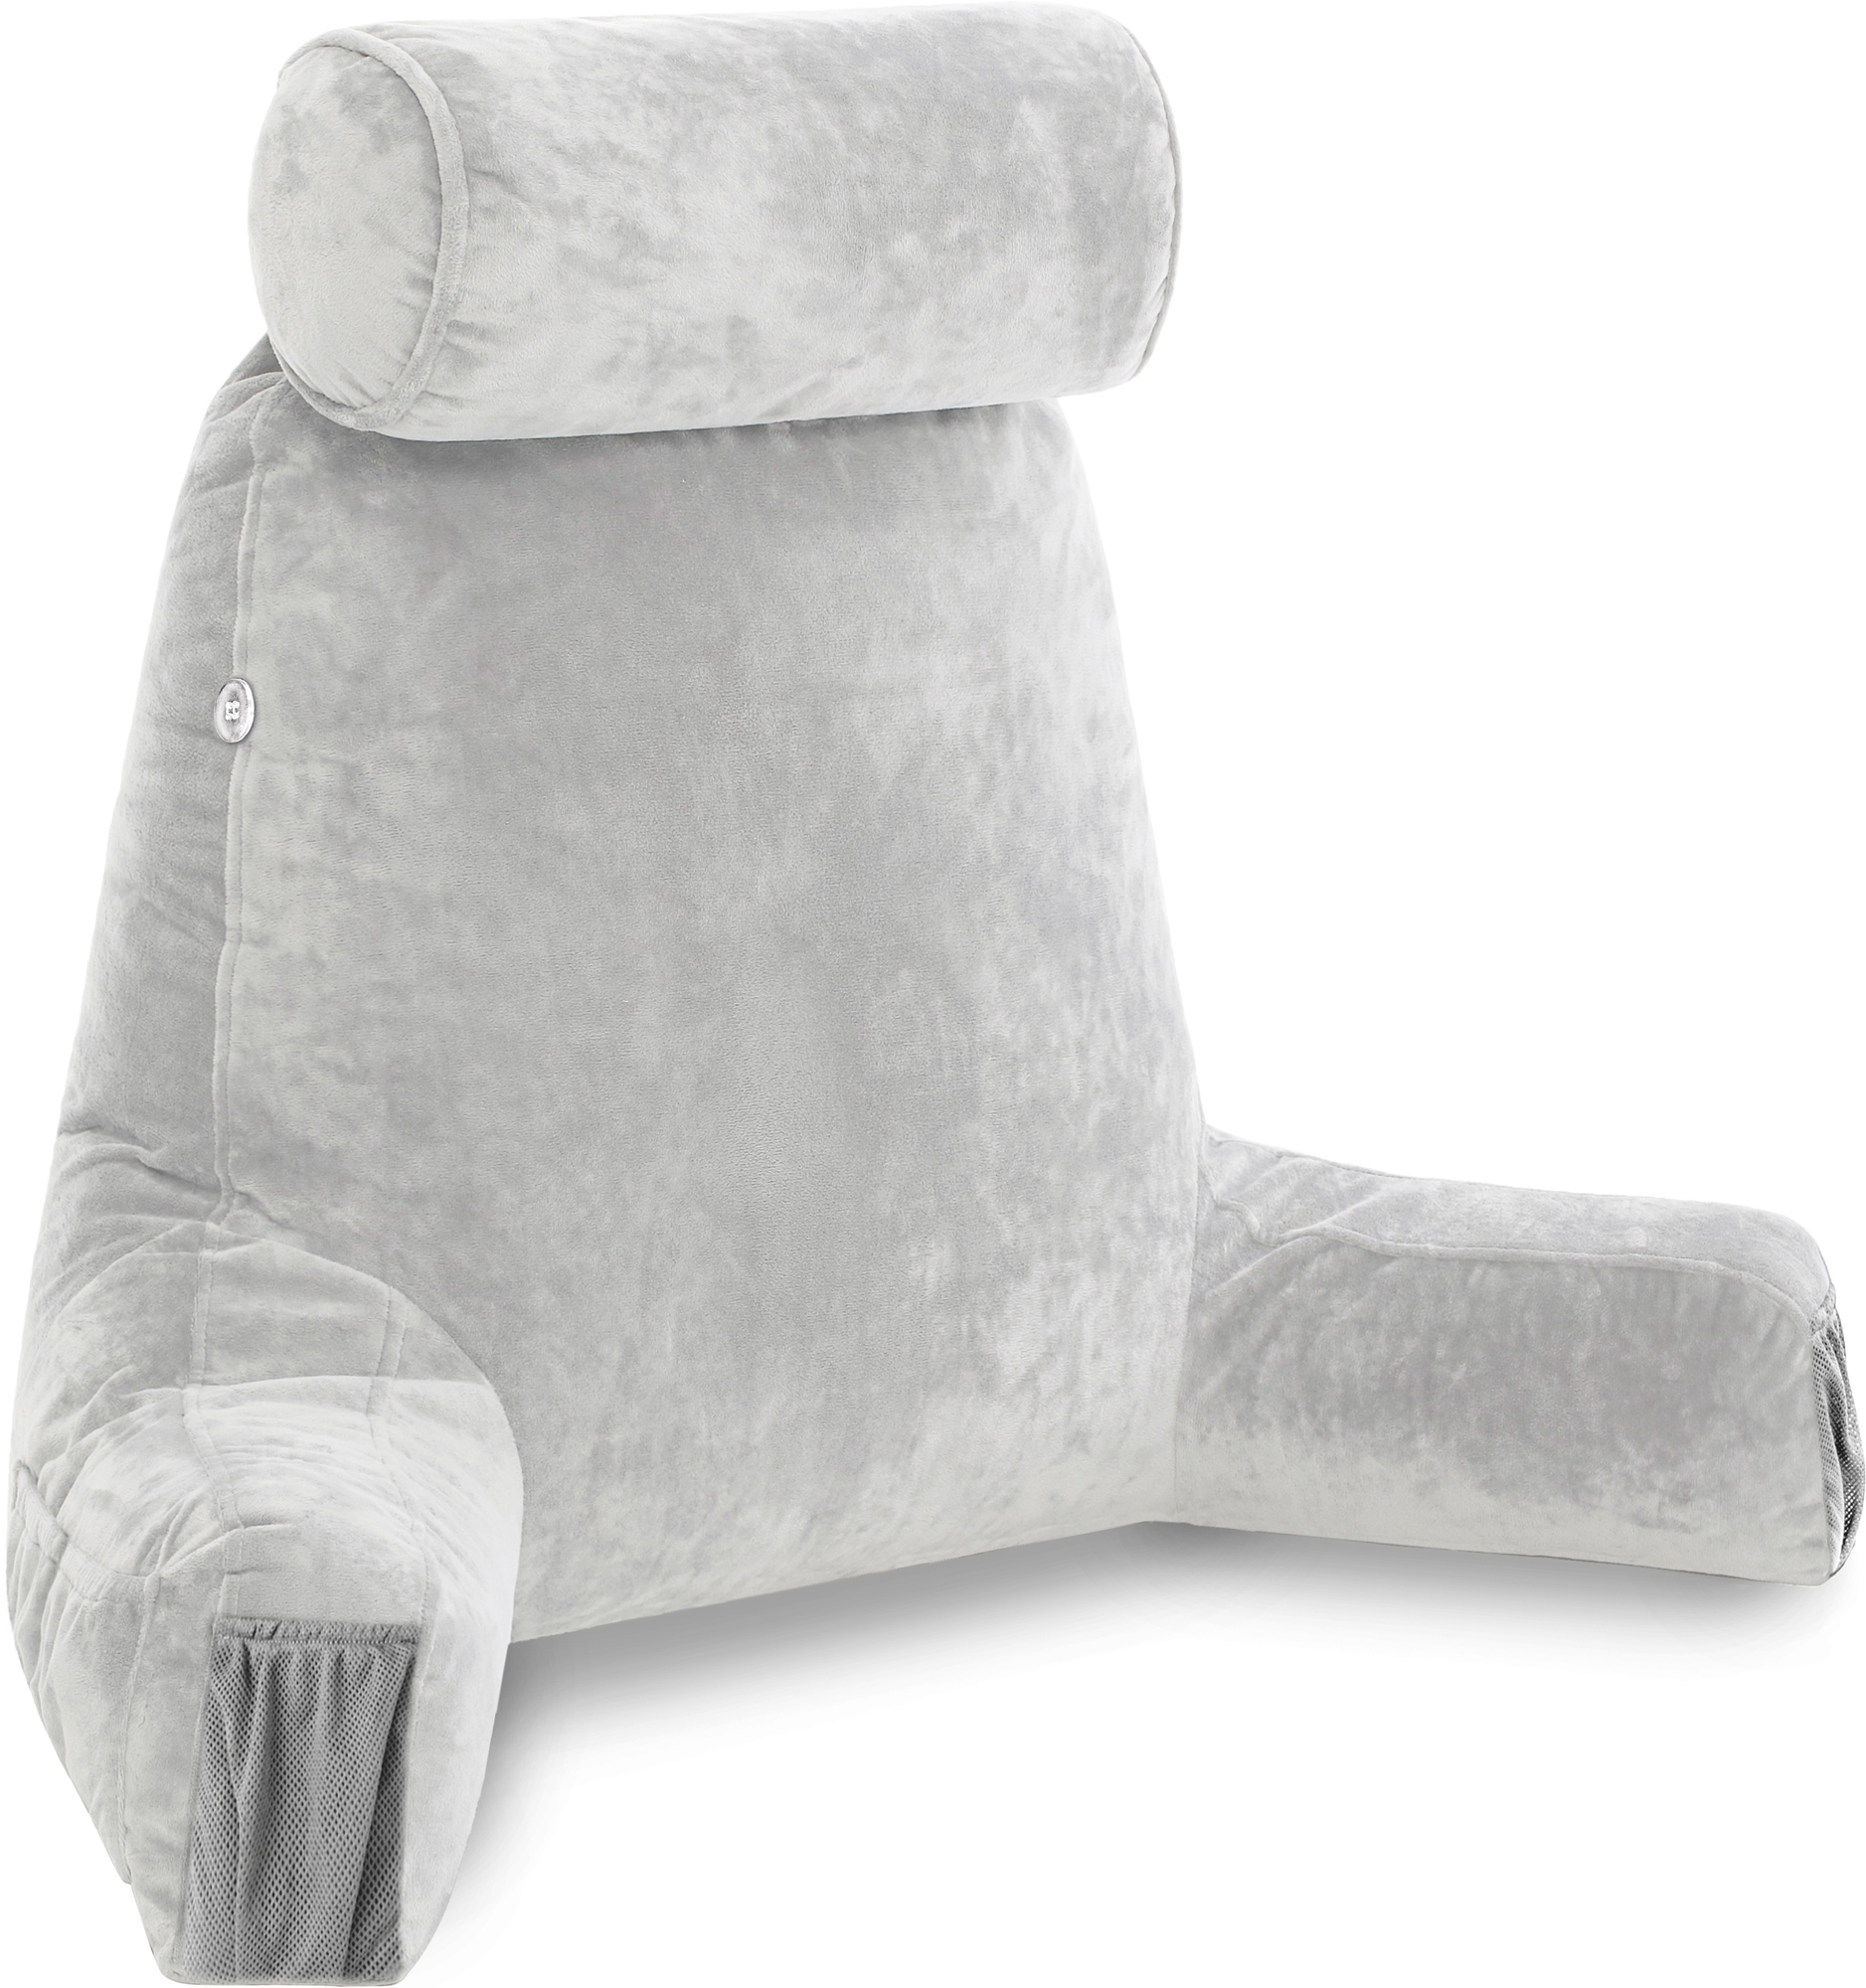 Husband Pillow Medium Light Grey, Backrest for Kids, Teens, Petite Adults - Reading Pillows With Arms, Adjustable Loft, Plush Memory Foam, Bed Rest Chair Sitting Up, Detach Neck Roll, Removable Cover - image 1 of 4